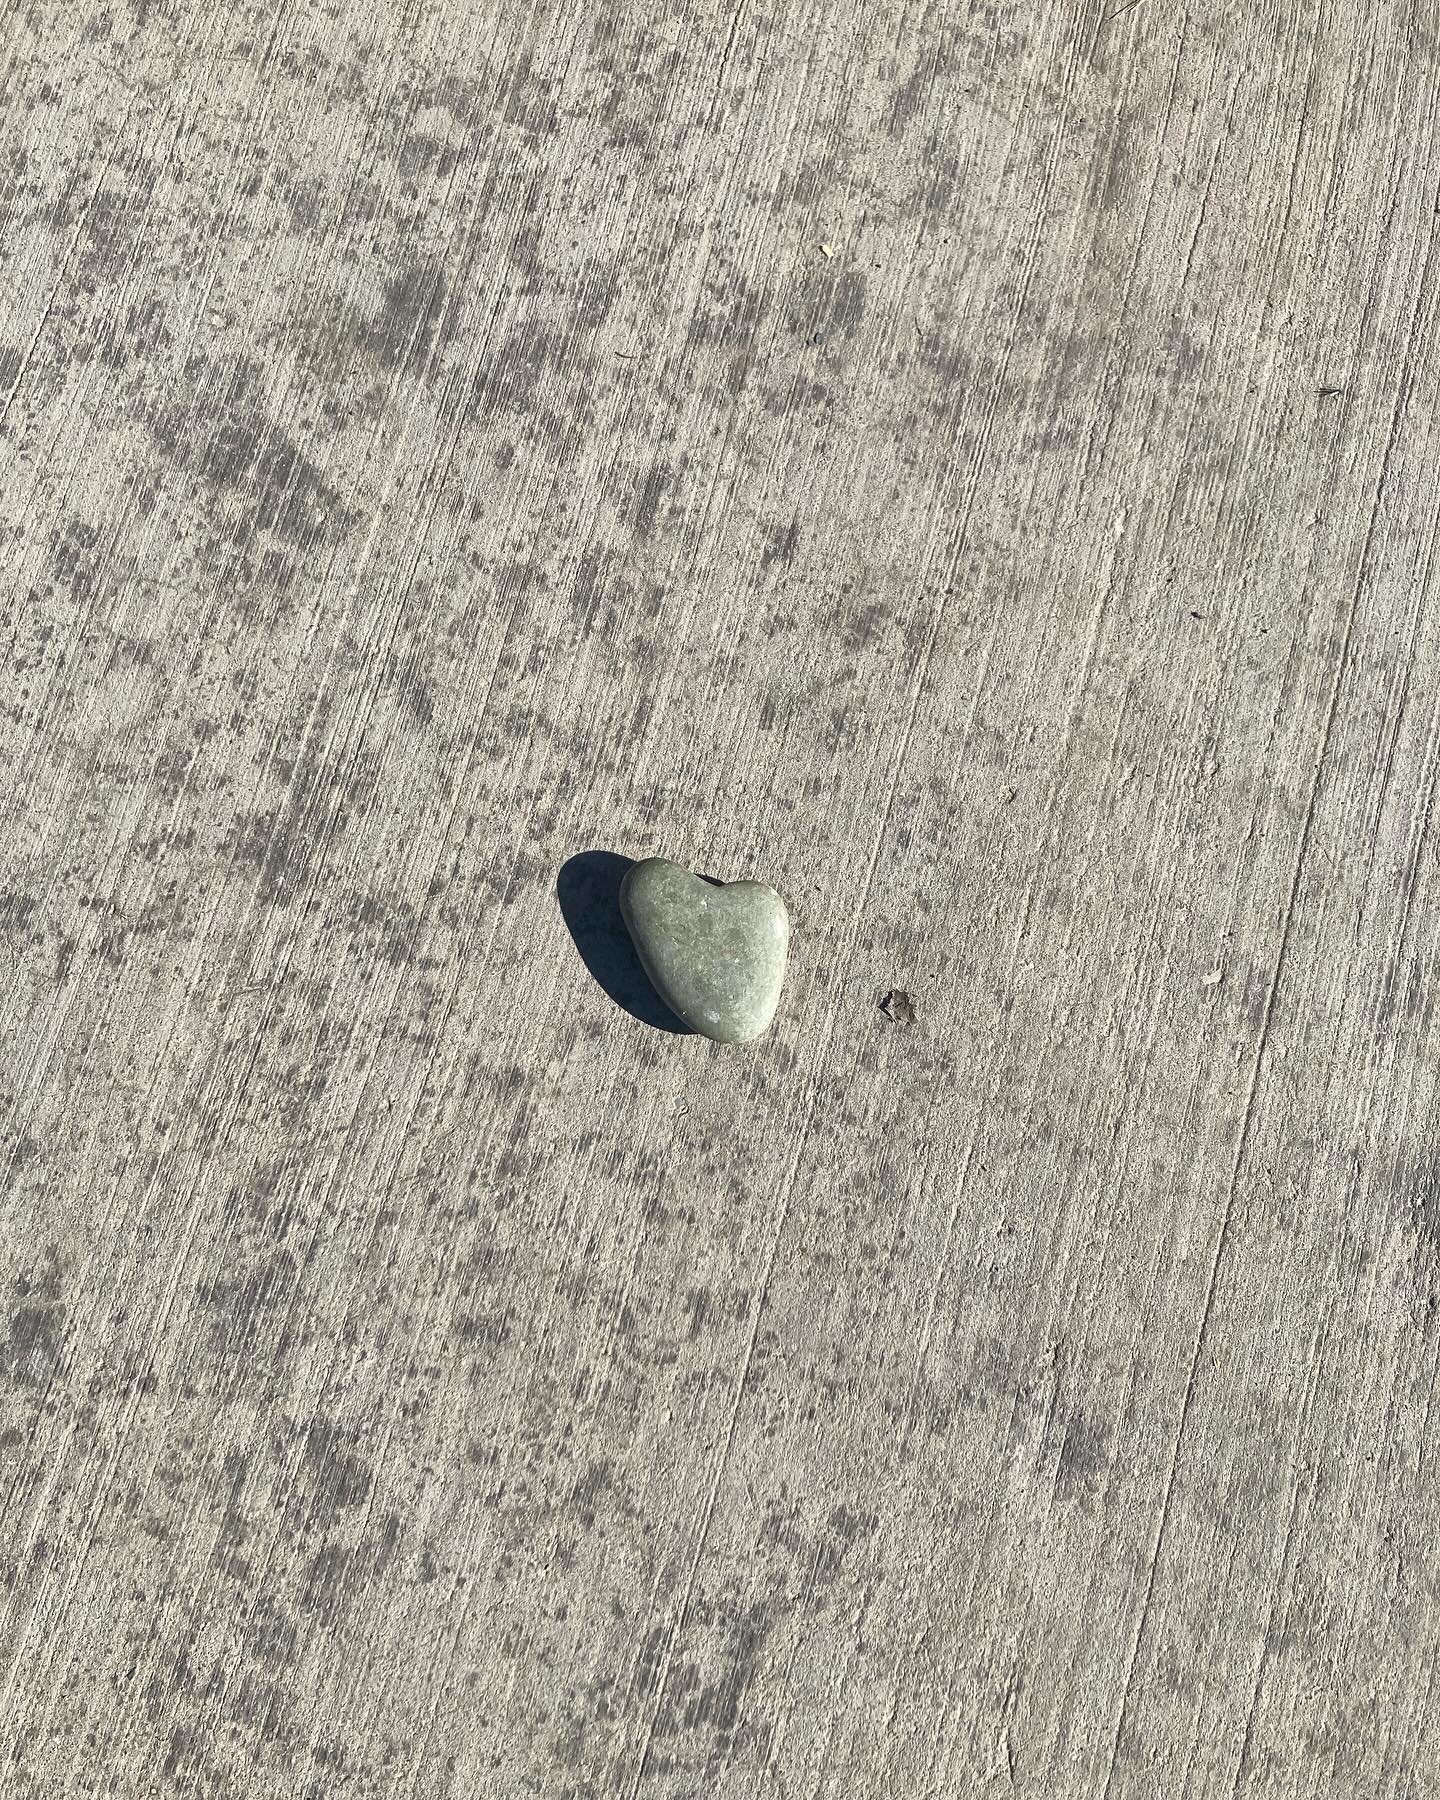 It&rsquo;s been awhile since I thought about my word of the year - joy. I loved that I was reminded of joy when I saw this heart shaped rock on my walk to work at @riverwesttherapycollectiveyyc . I instantly smiled and remembered the word joy. I like